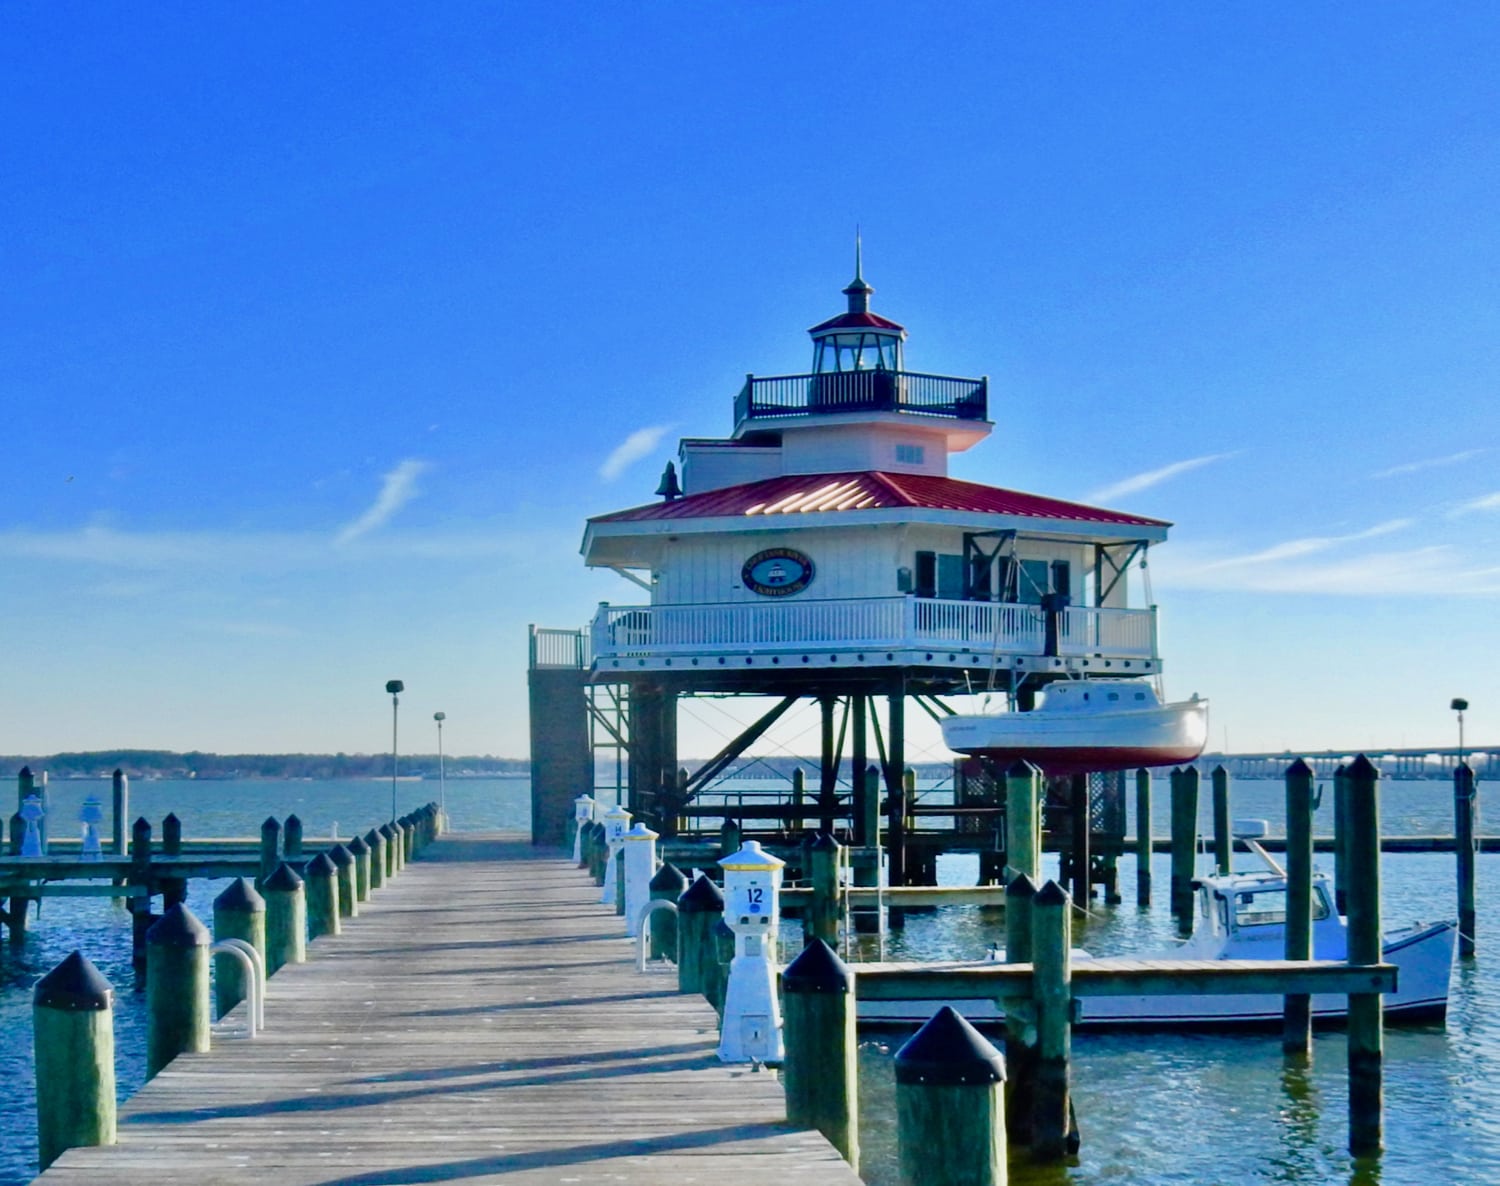 Visit Choptank River Lighthouse - one of many things to do in Cambridge MD